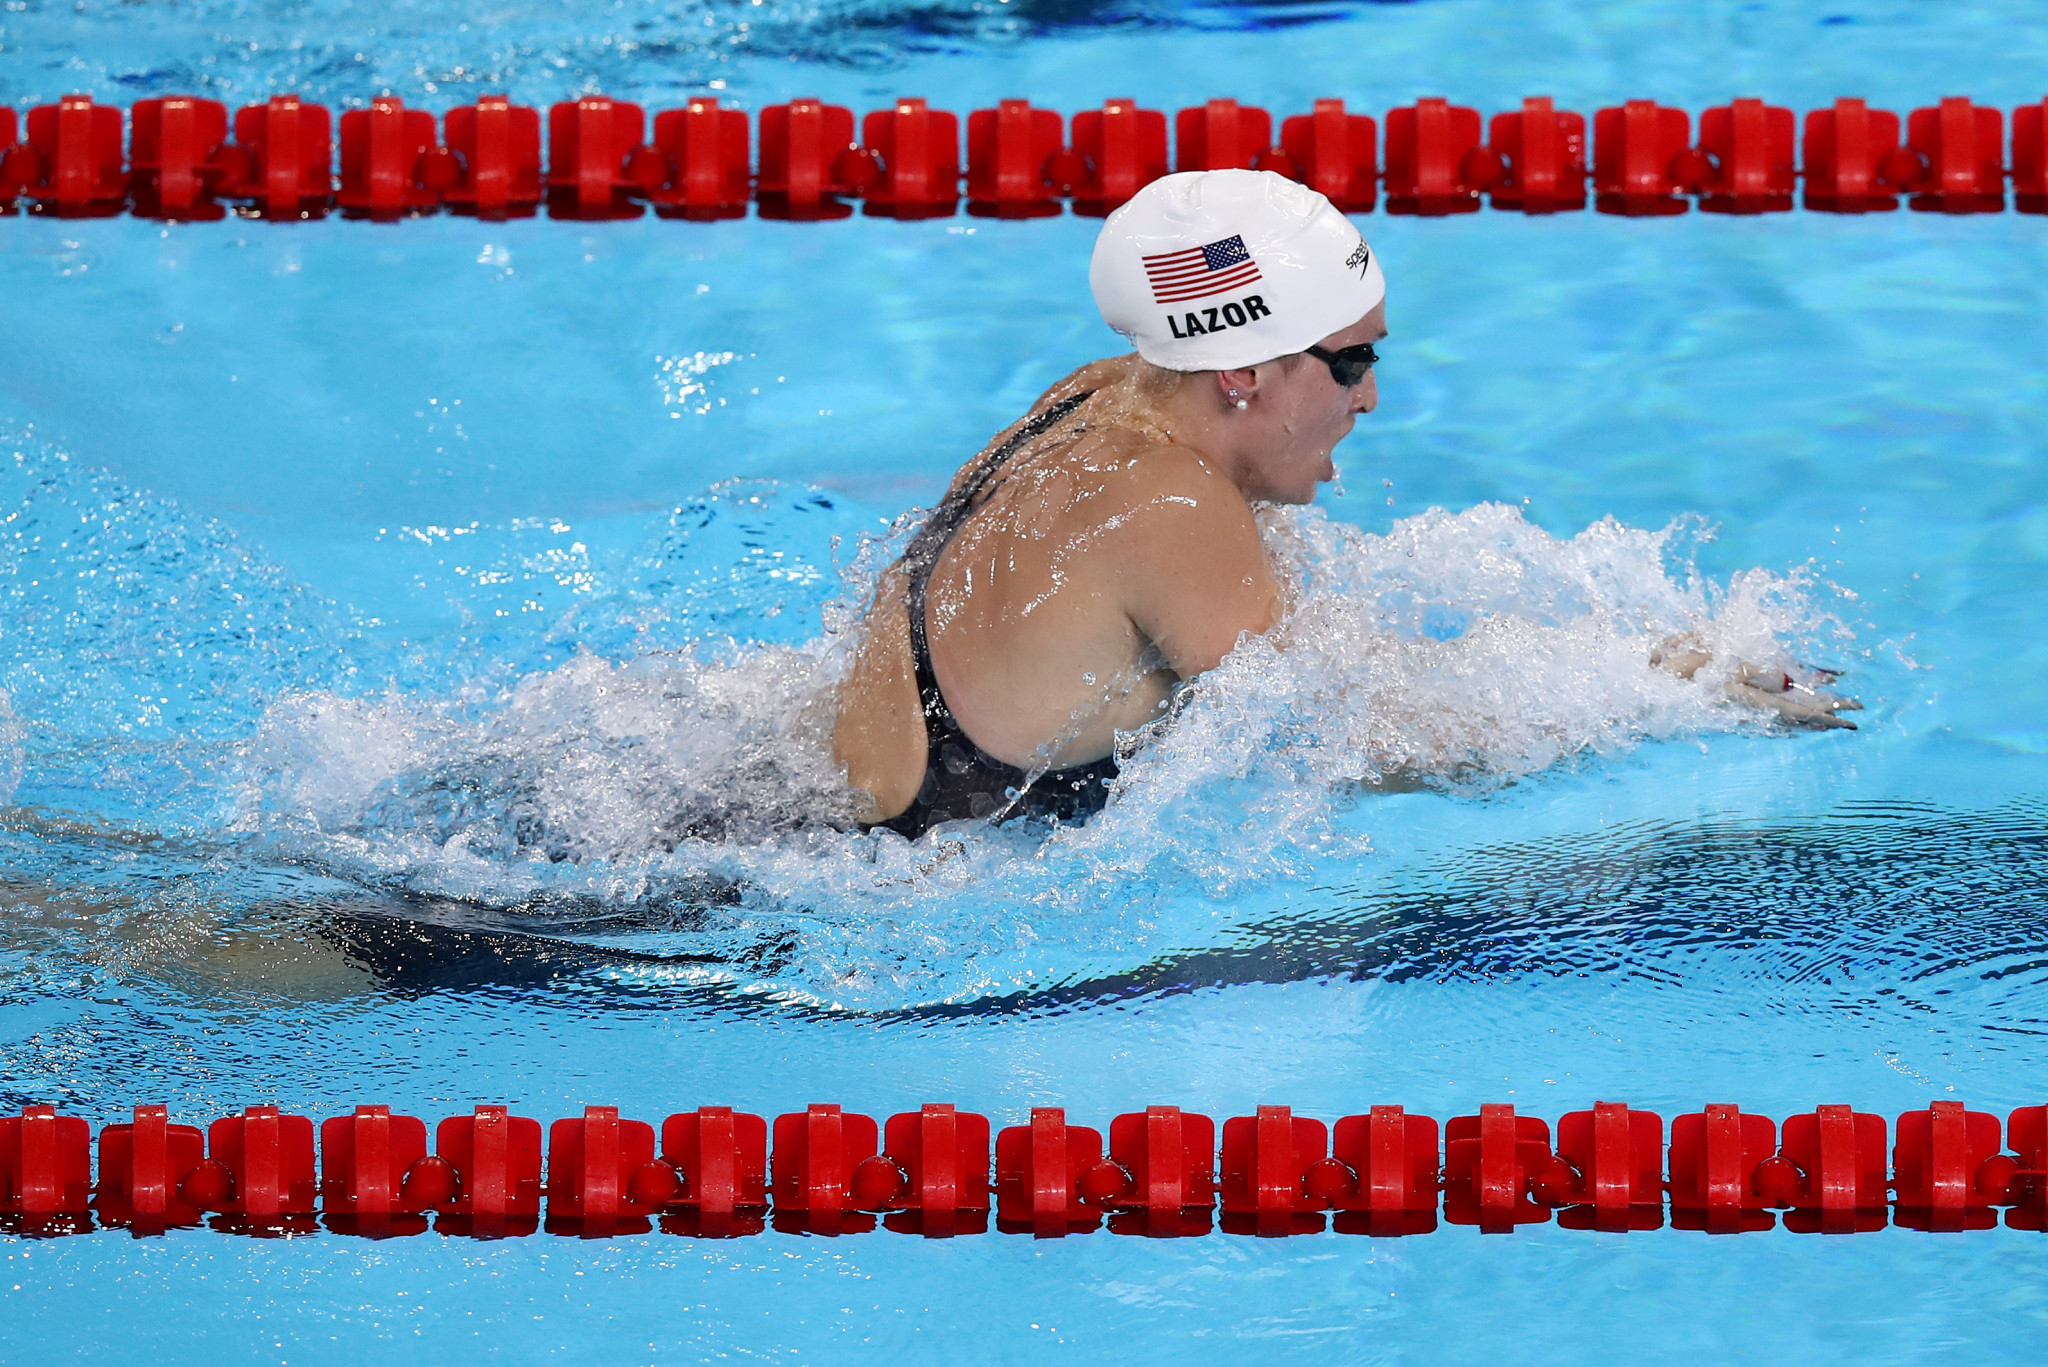 Anne Lazor of the US won her second Lima 2019 gold medal in the women's 200m breaststroke ©Getty Images